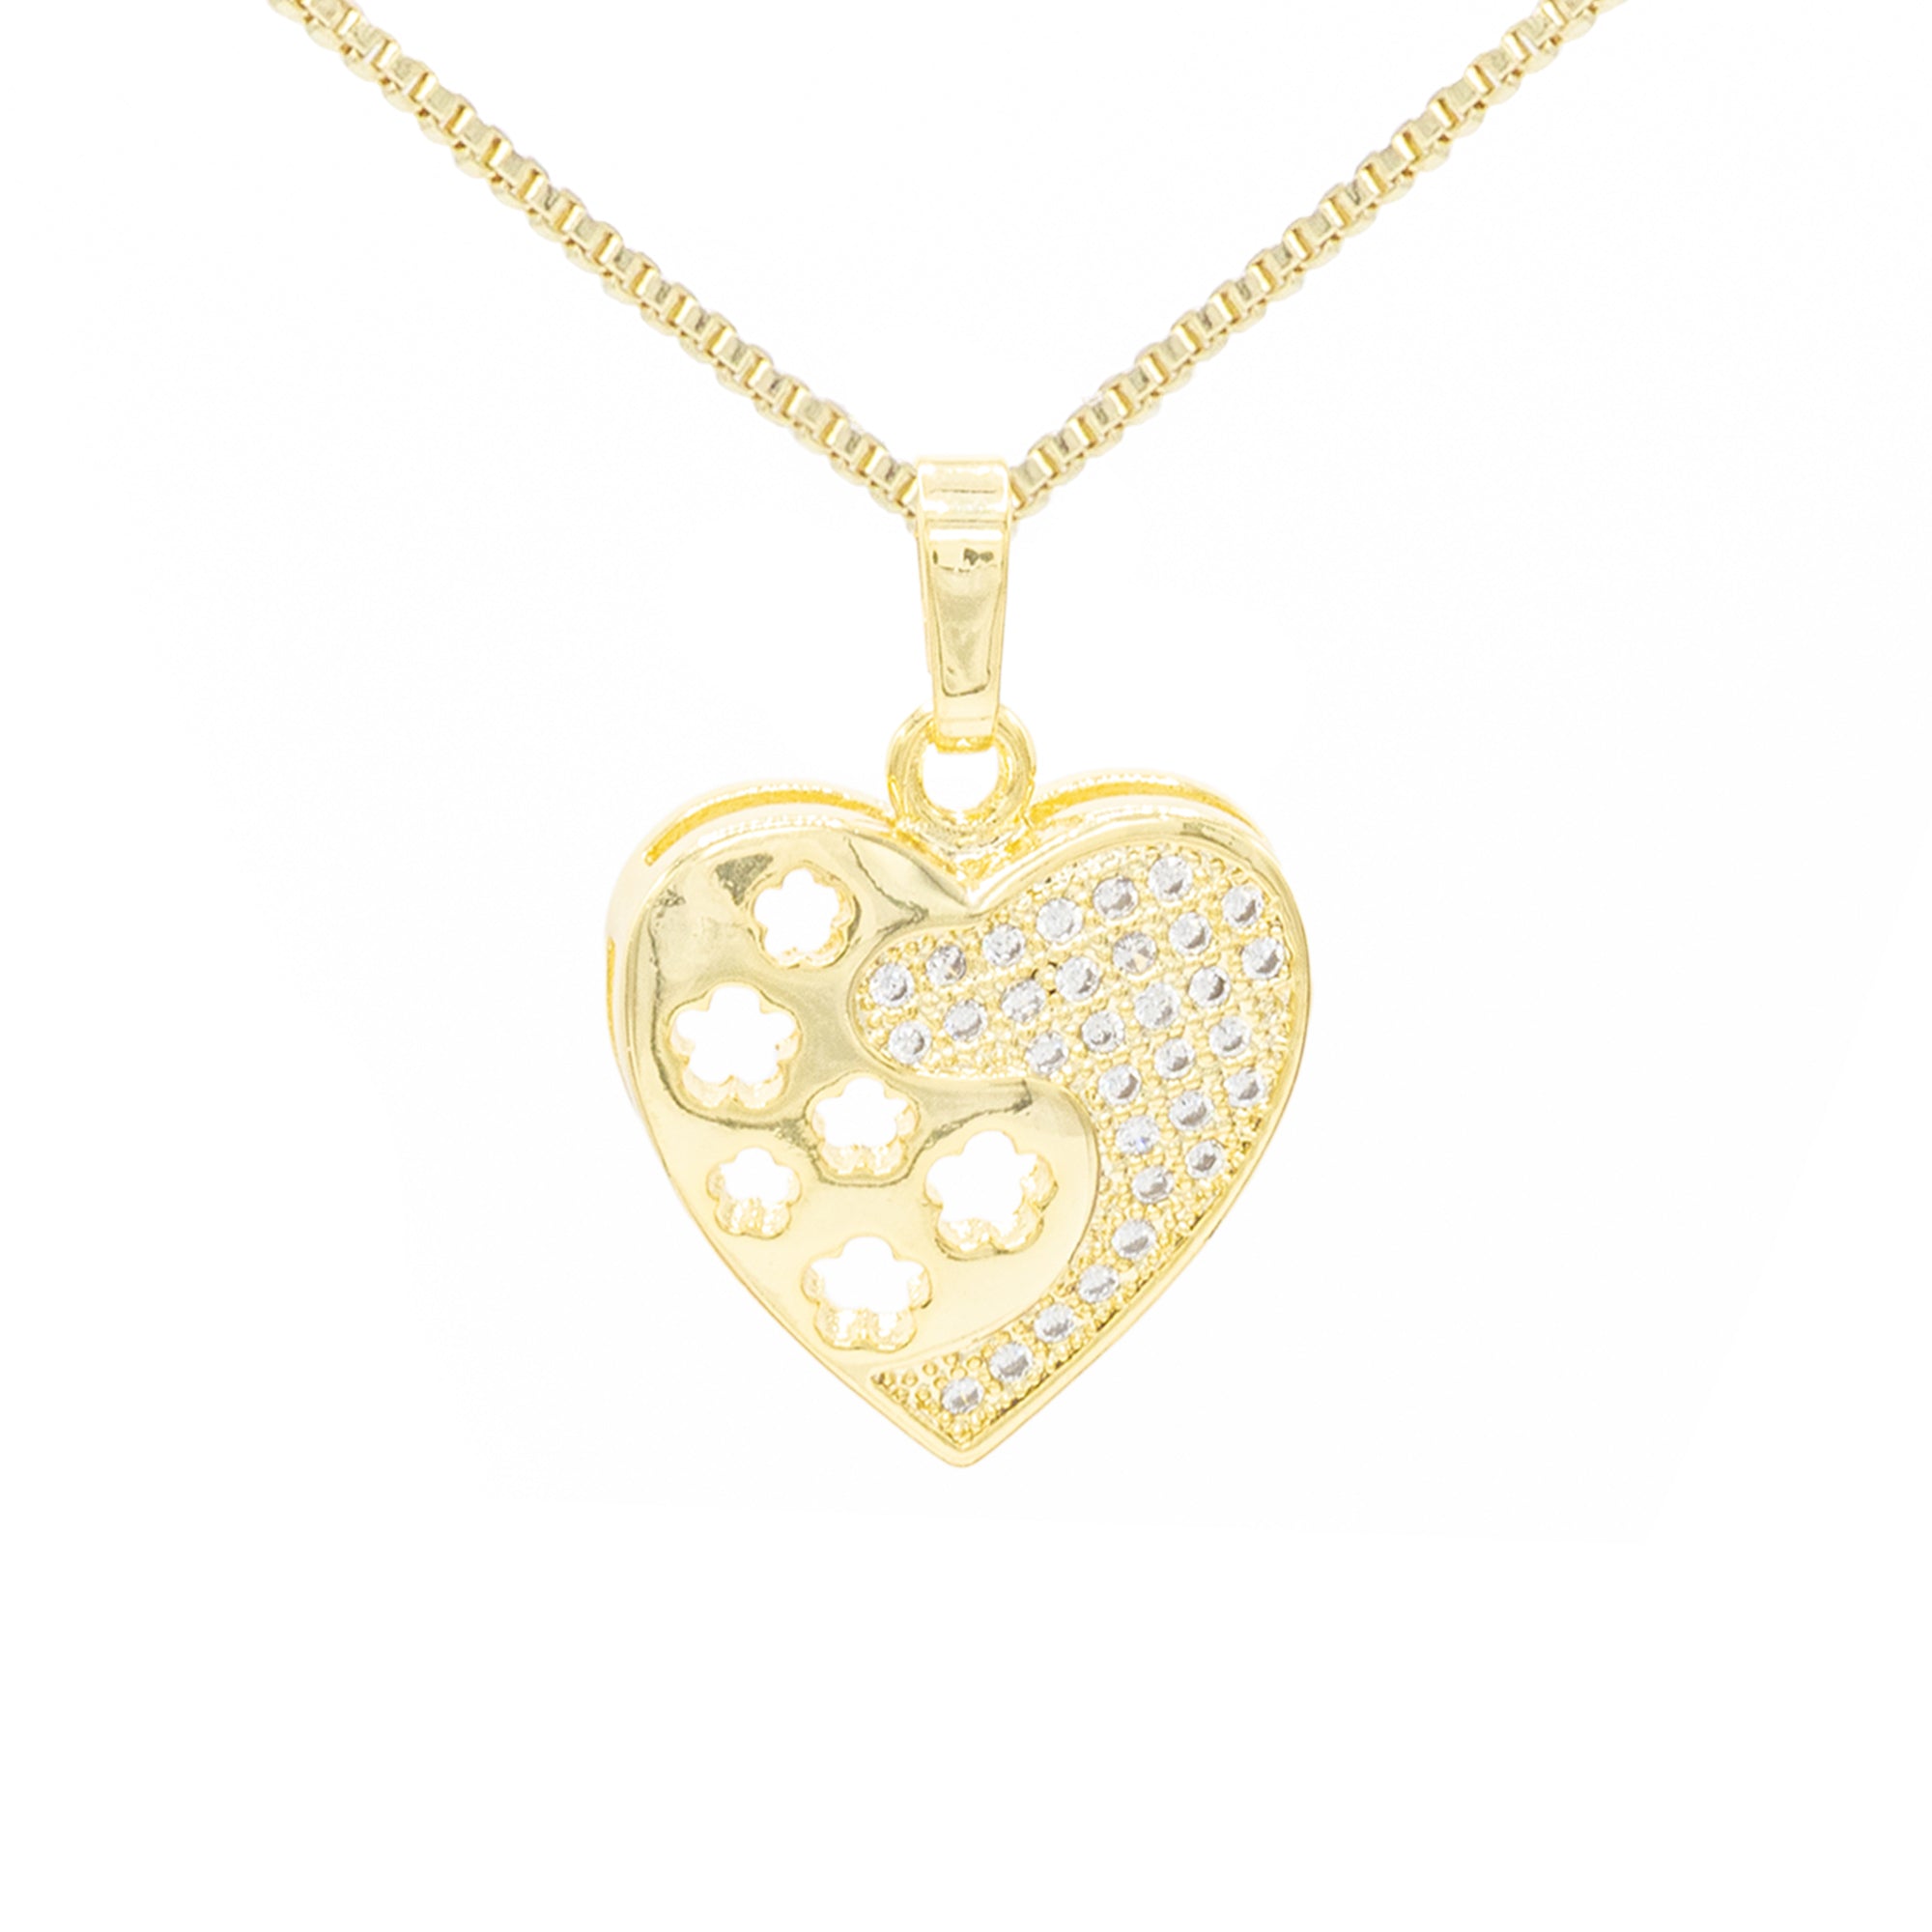 Beberlini CZ Heart Pendant 14K Gold Filled Charm Necklace Set Cuban Link Box Rope Chain Lobster Clasp Fashion Cubic Zirconia Jewelry Gift Women Girls